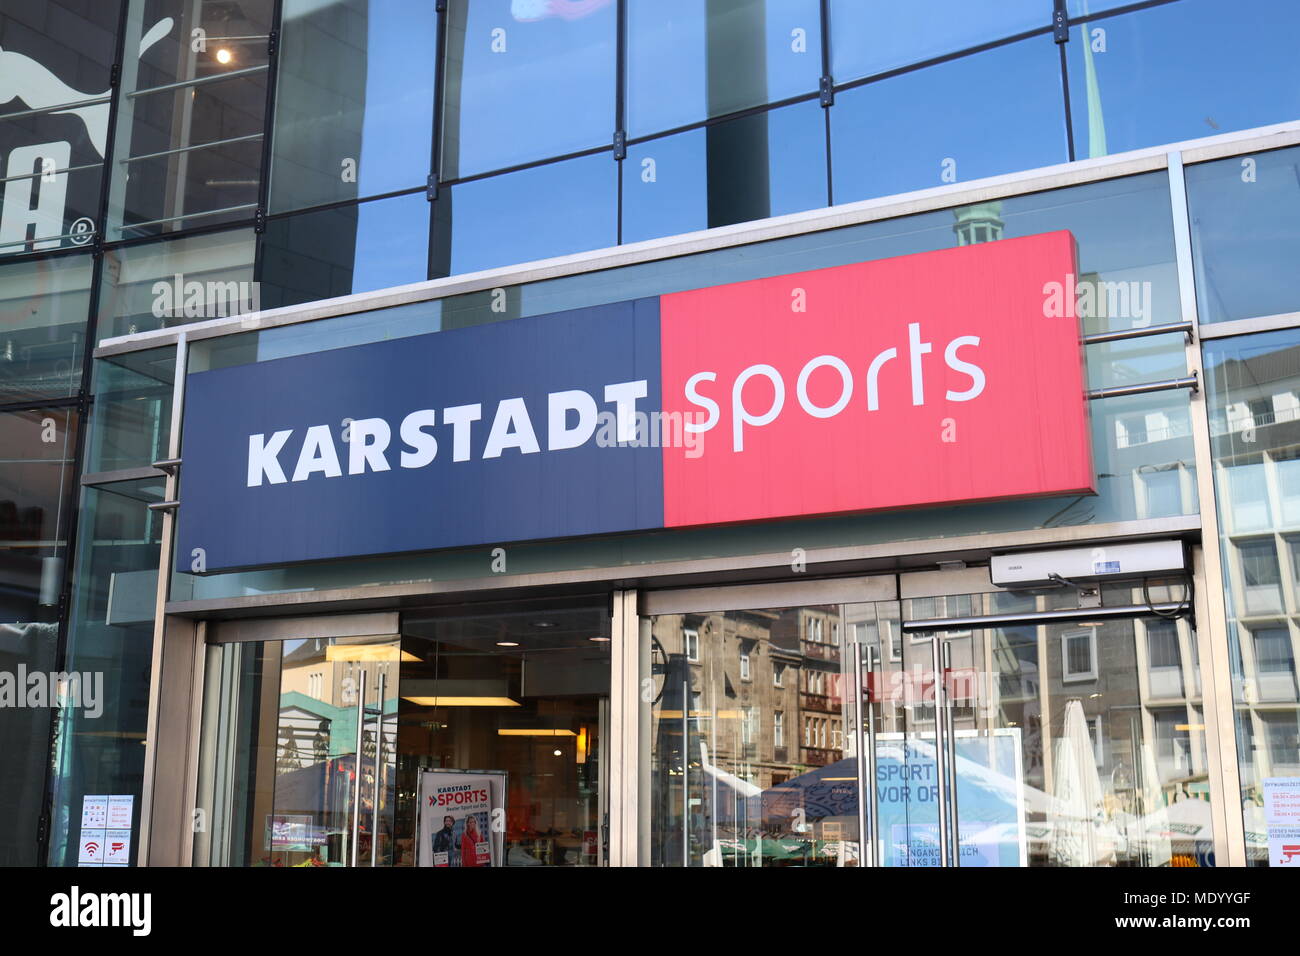 Karstadt germany High Resolution Stock Photography and Images - Alamy